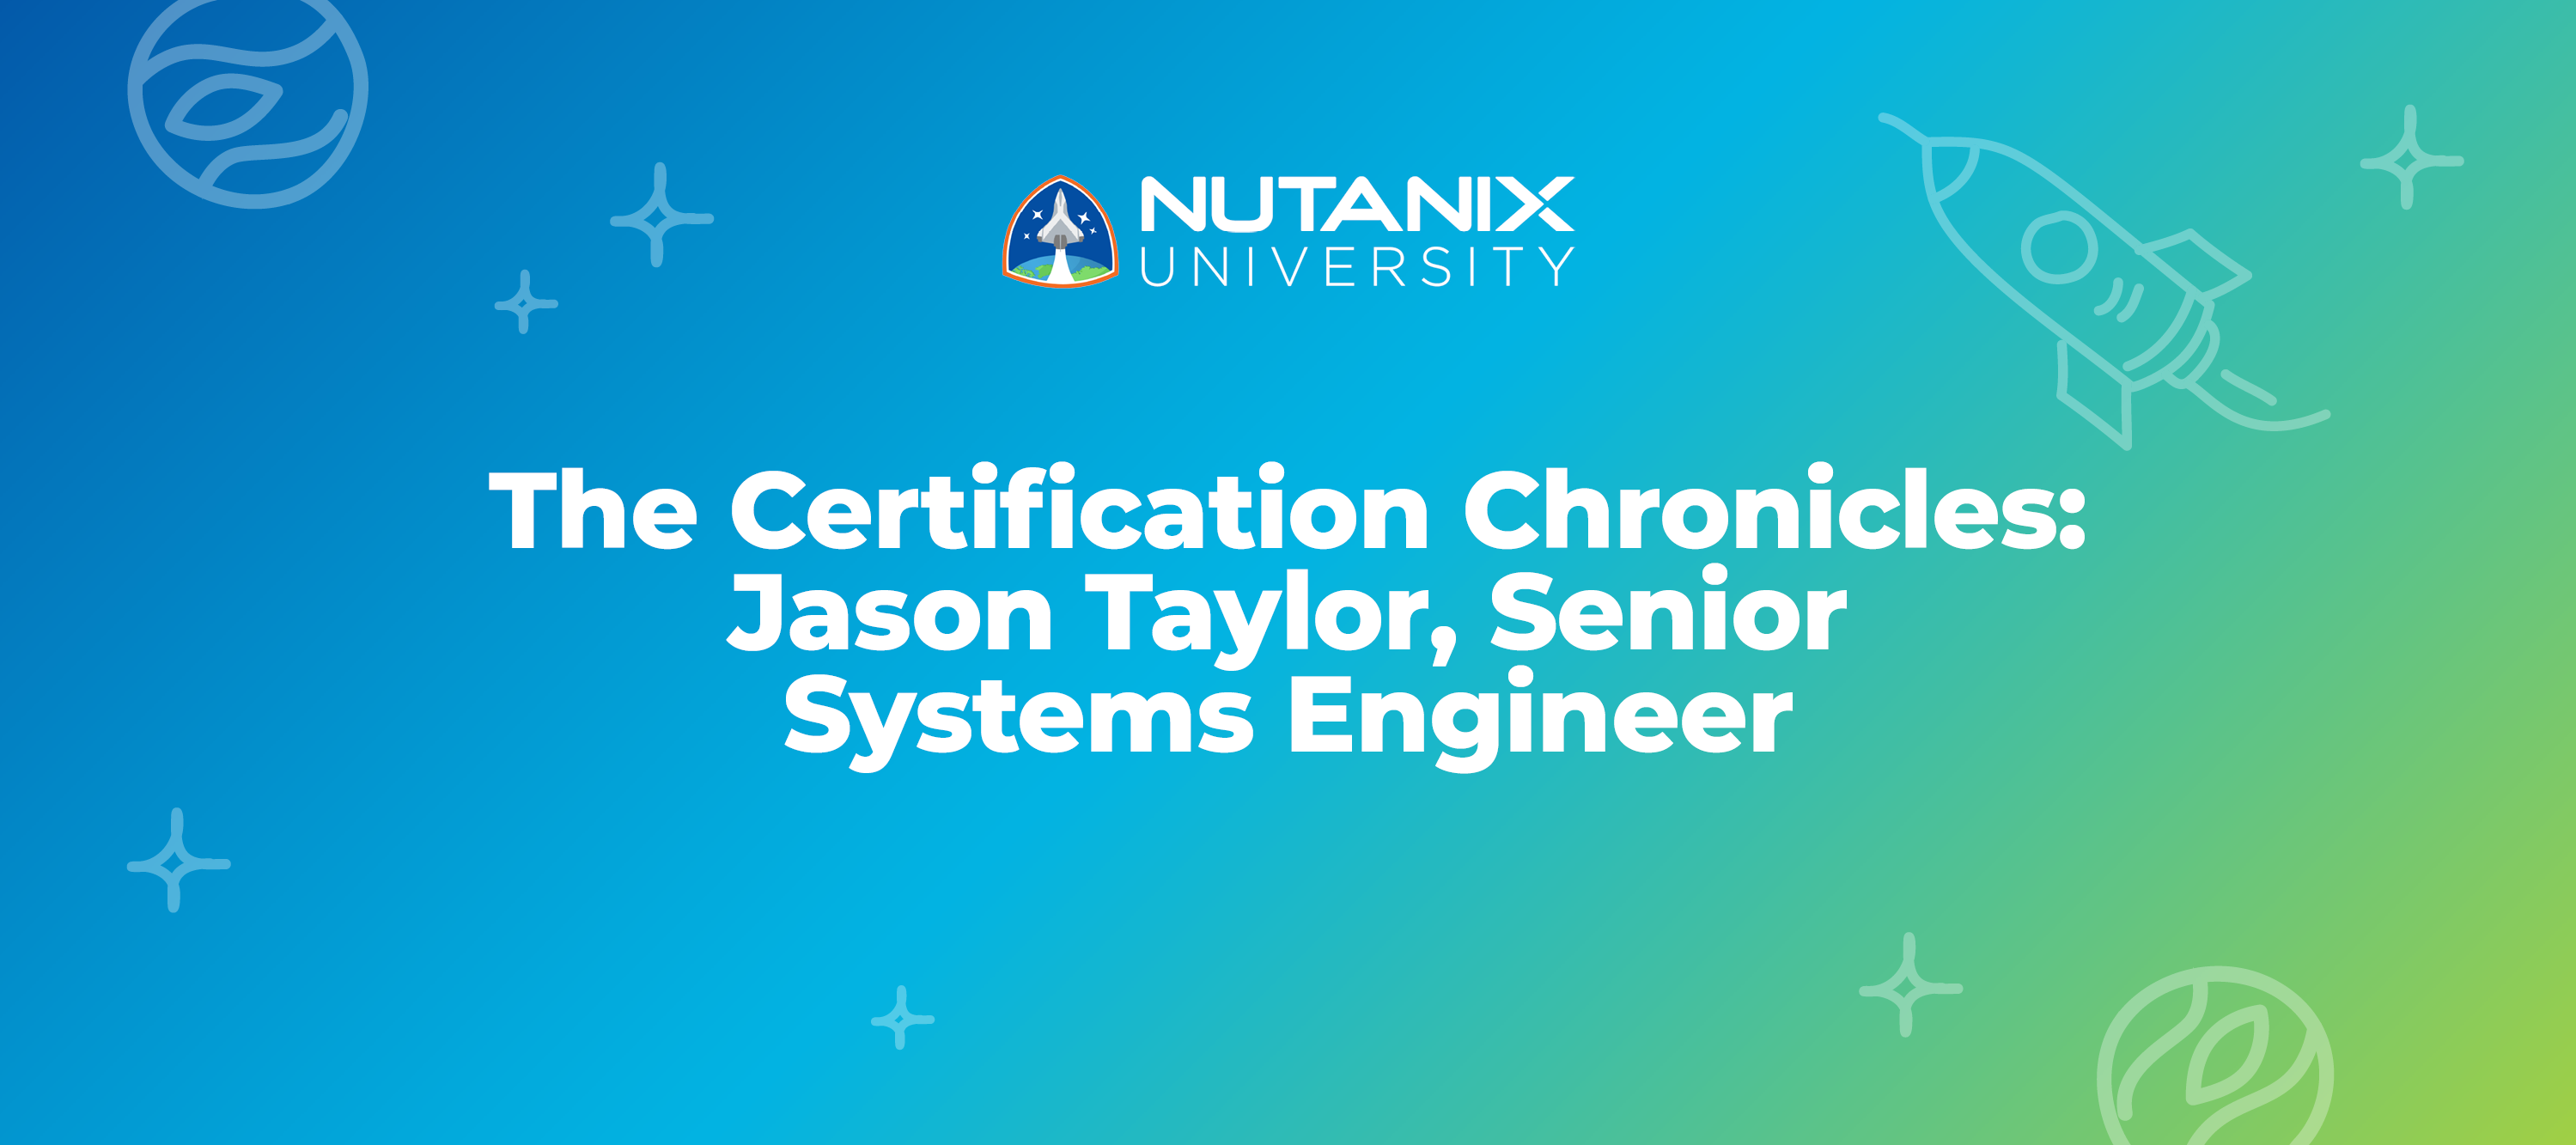 The Certification Chronicles: Jason Taylor, Senior Systems Engineer